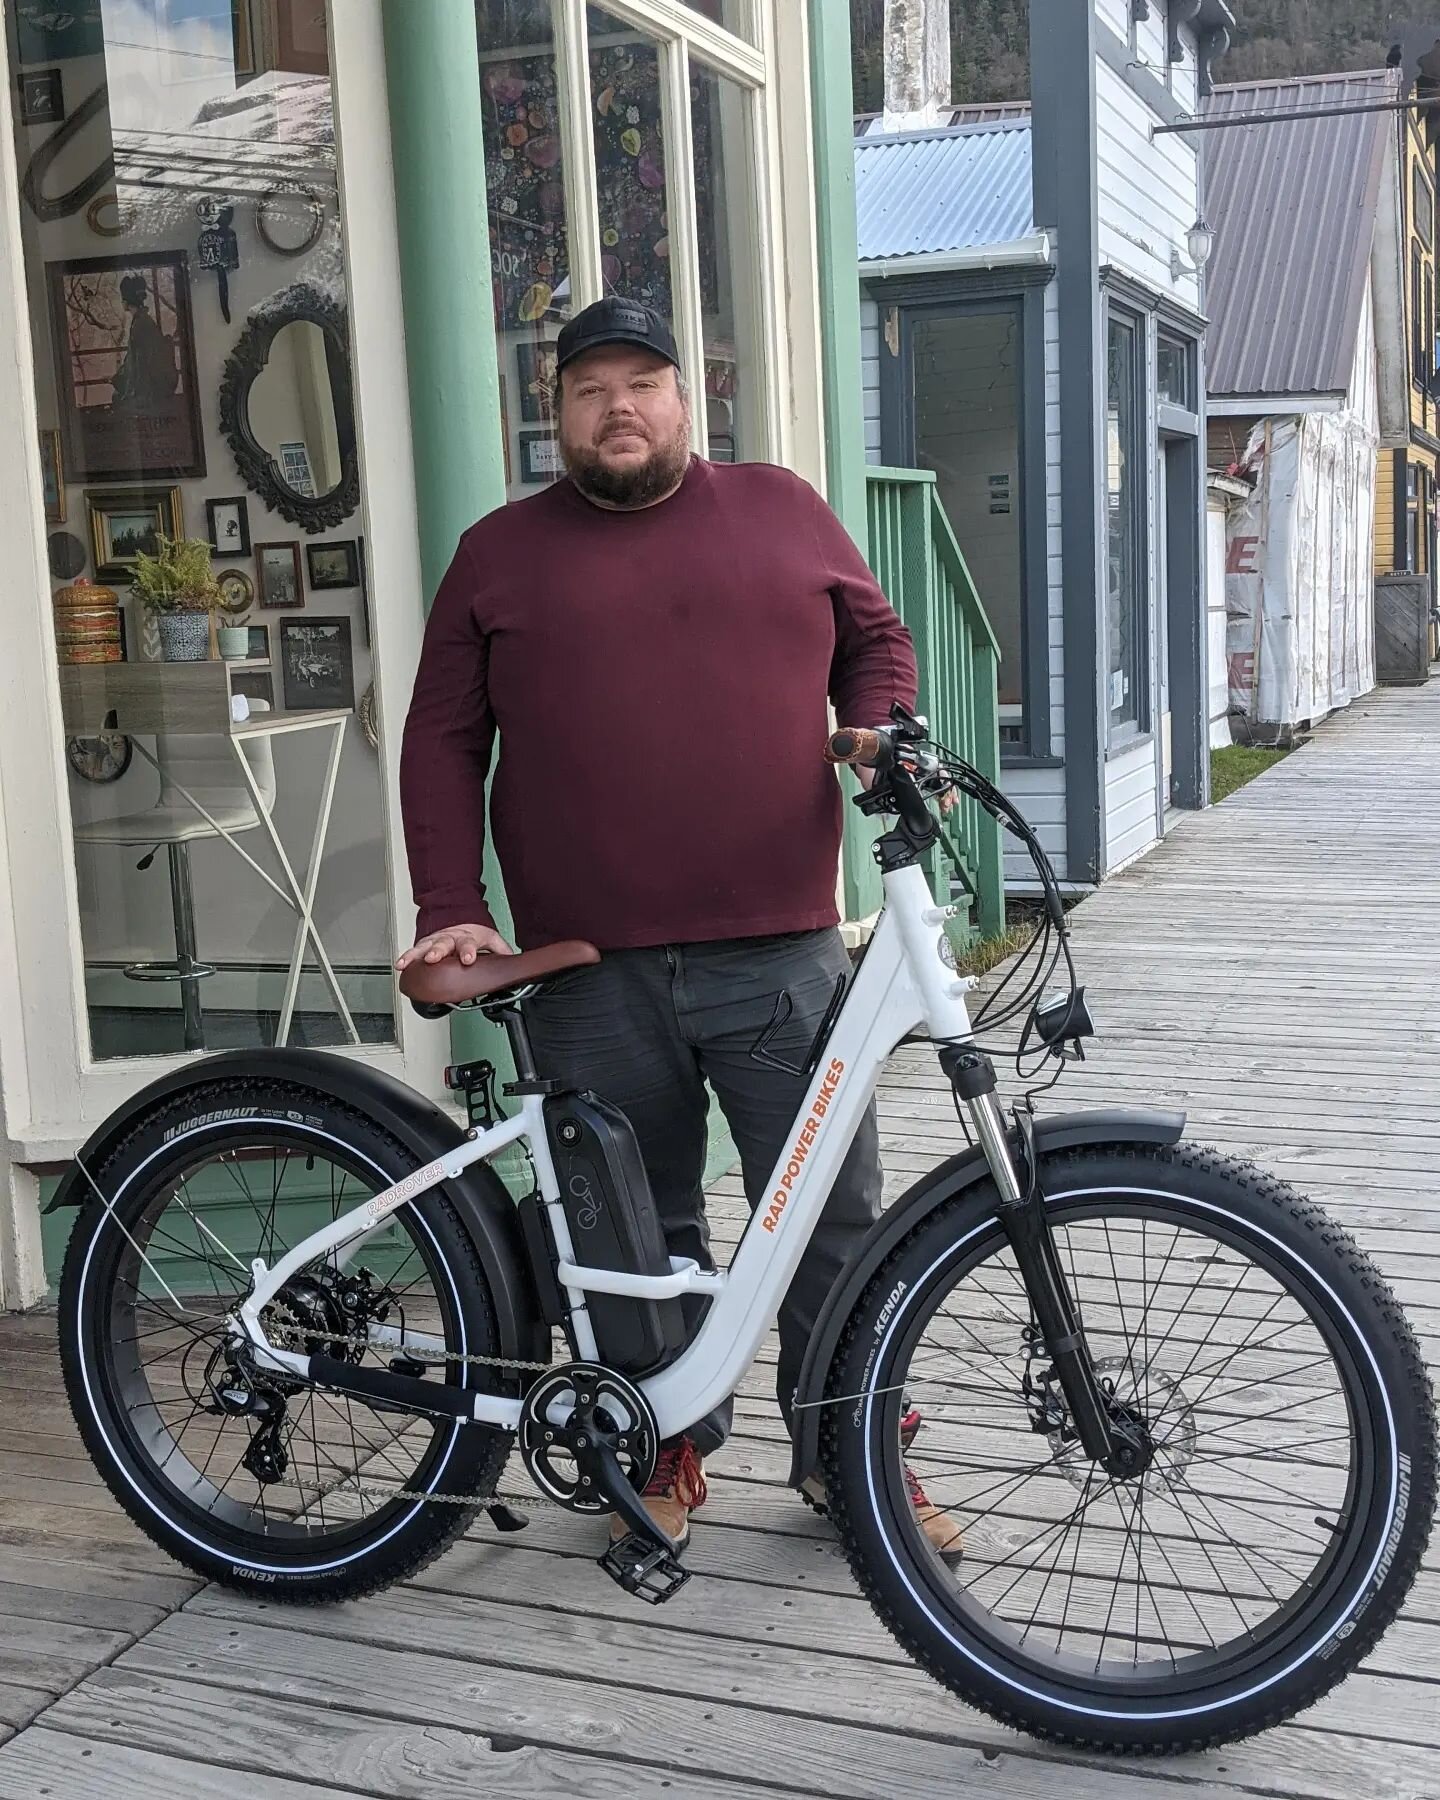 George is the man behind the idea for Klondike Electric Bicycles.  This was his vision.  Our Klondike Bikes journey has not always been an easy one.

We started our business just in time for the world to shut down because of Covid.  After two &quot;C